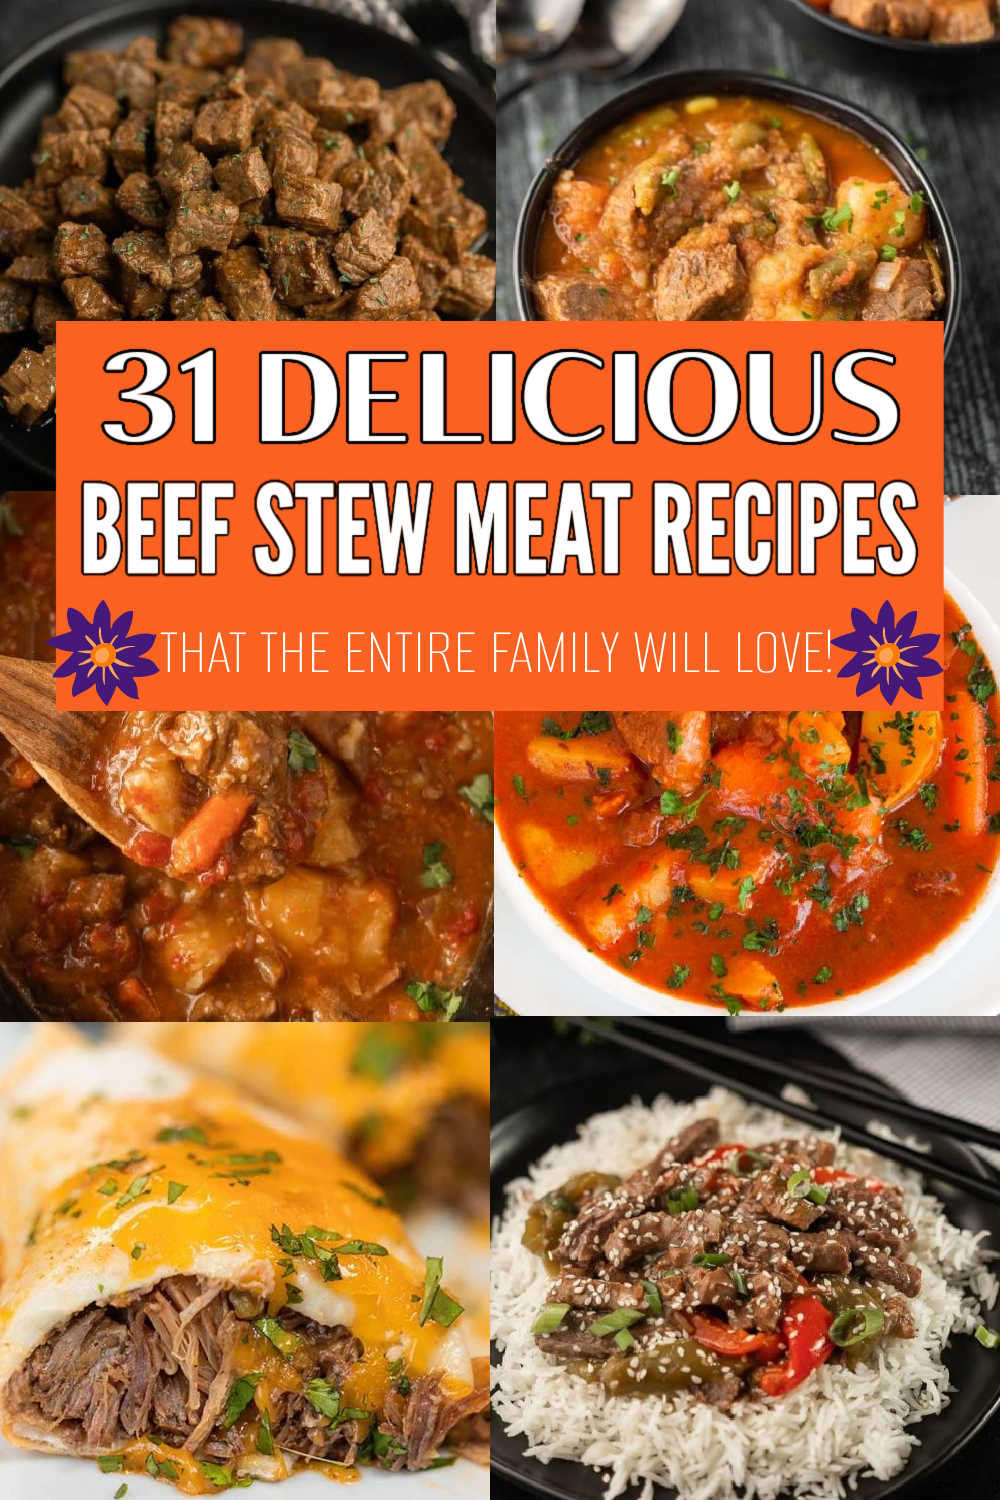 Beef Stew Meat Recipes are easy to make and the results are a hearty and comforting meal. These 31 recipes are sure to please a crowd. These stew meat recipes are budget friendly and easy way to get dinner on the table. Slow Cooked meat always results in tender, juicy flavorful meat. #eatingonadime #beefstewmeatrecipes #easyrecipes